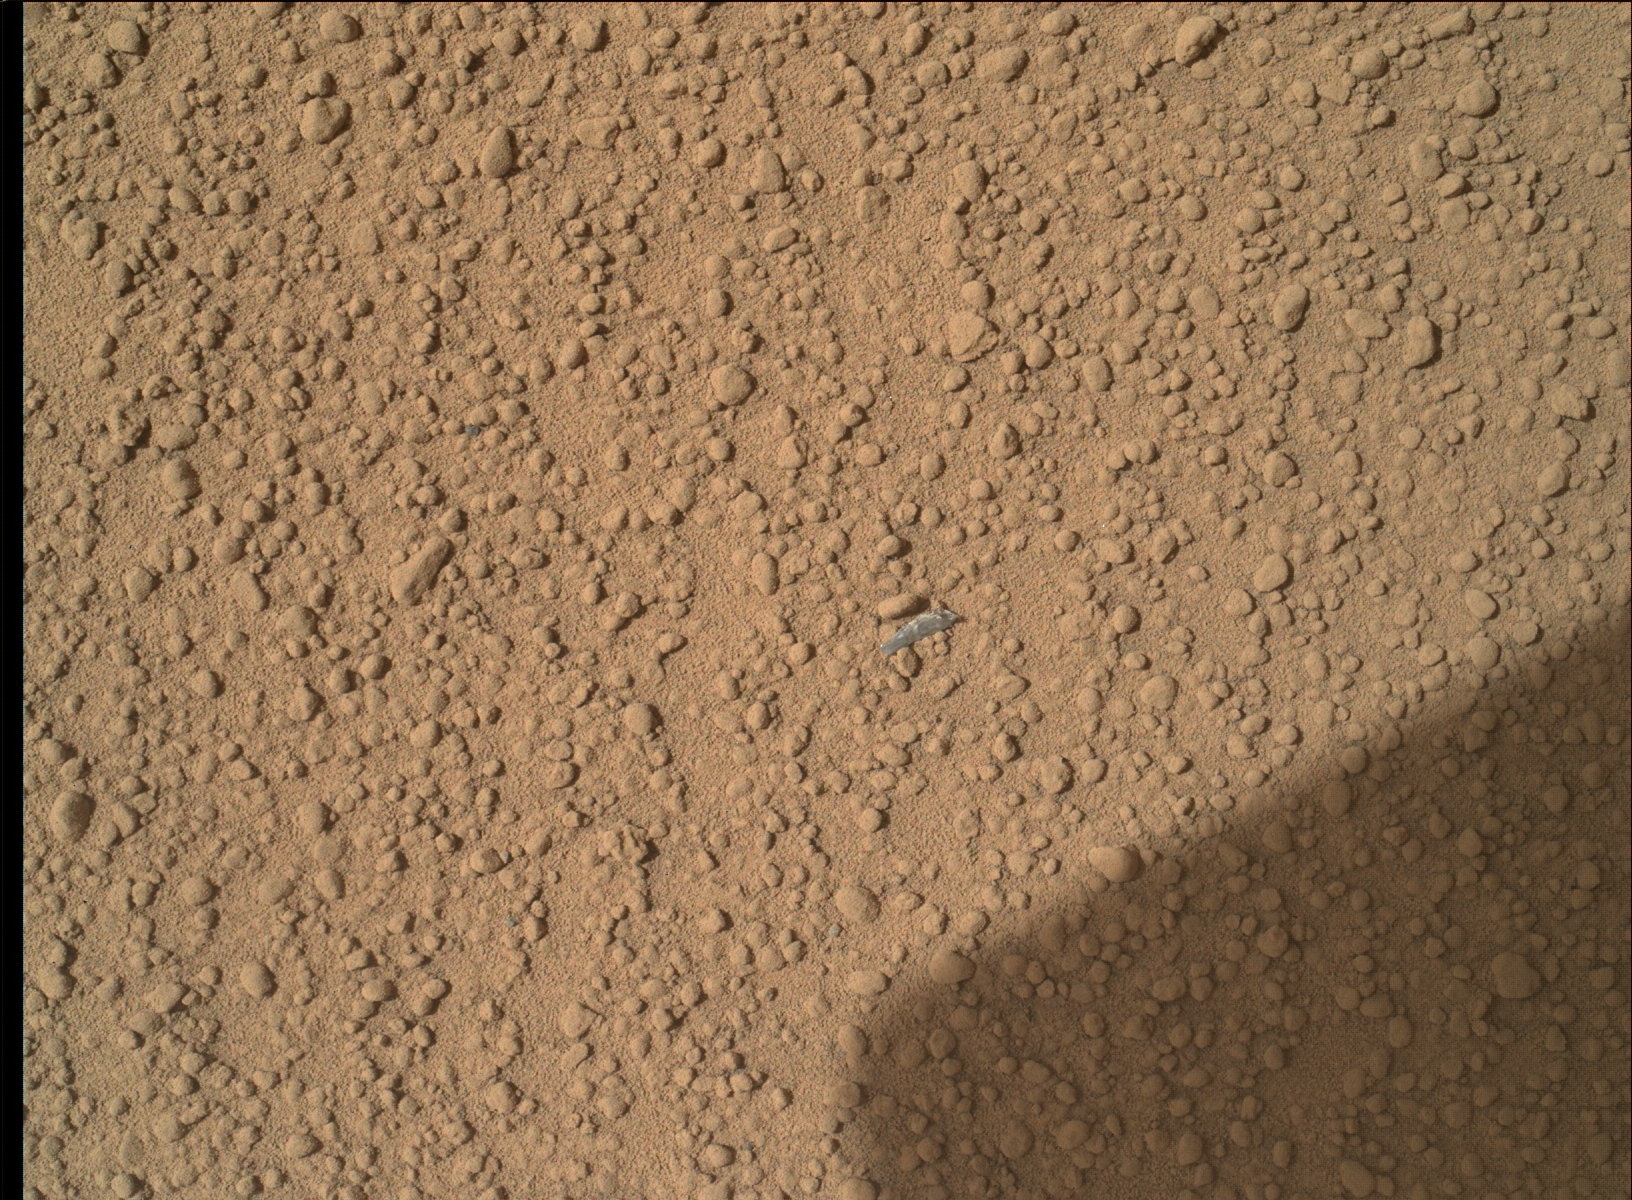 Nasa's Mars rover Curiosity acquired this image using its Mars Hand Lens Imager (MAHLI) on Sol 65